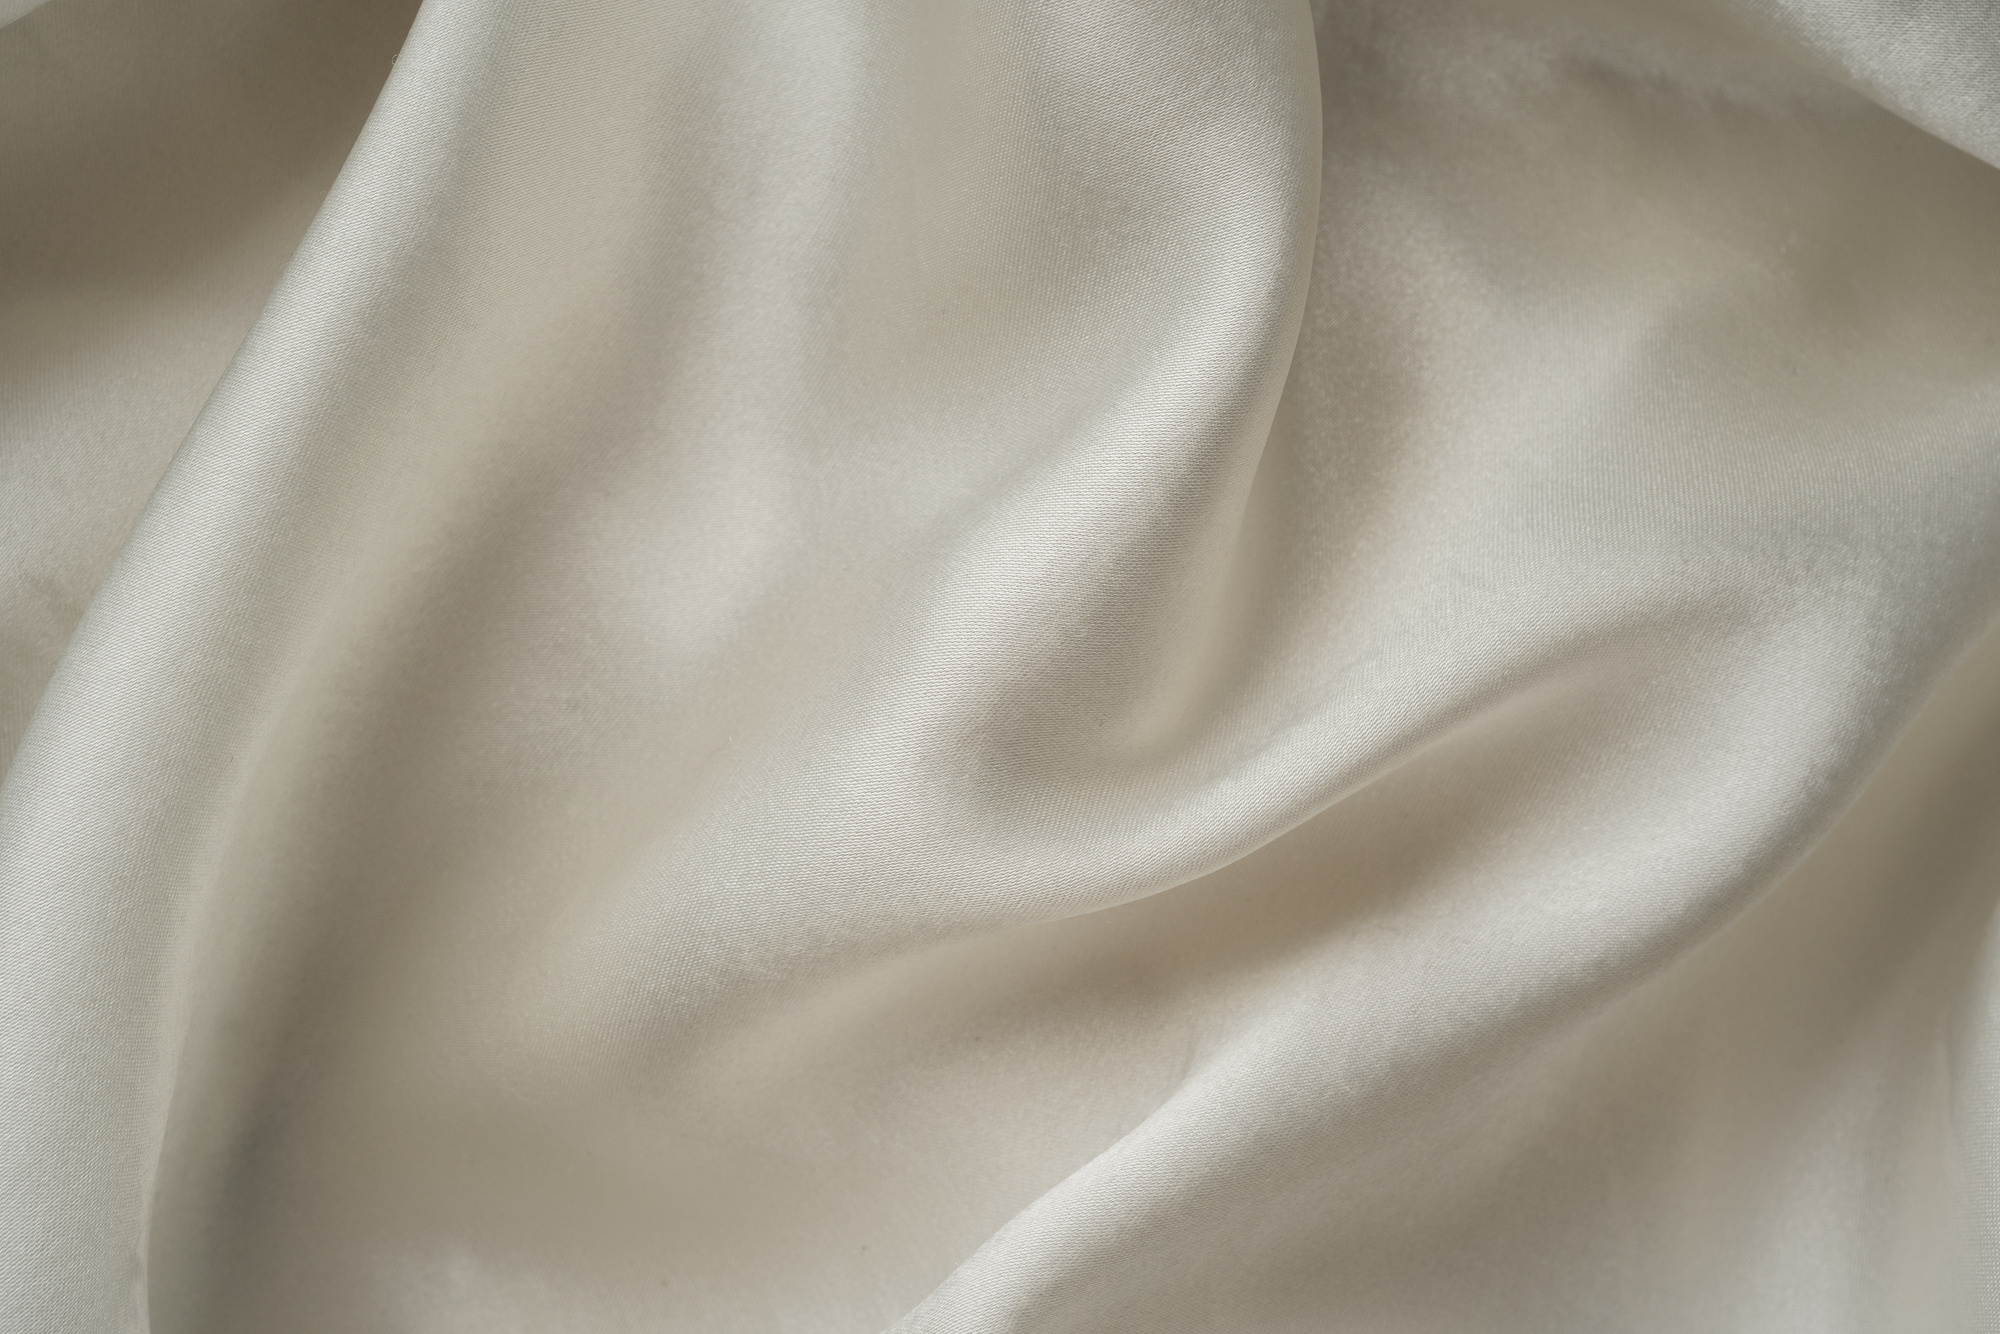 Blurred Background of a White Soft Satin Fabric 